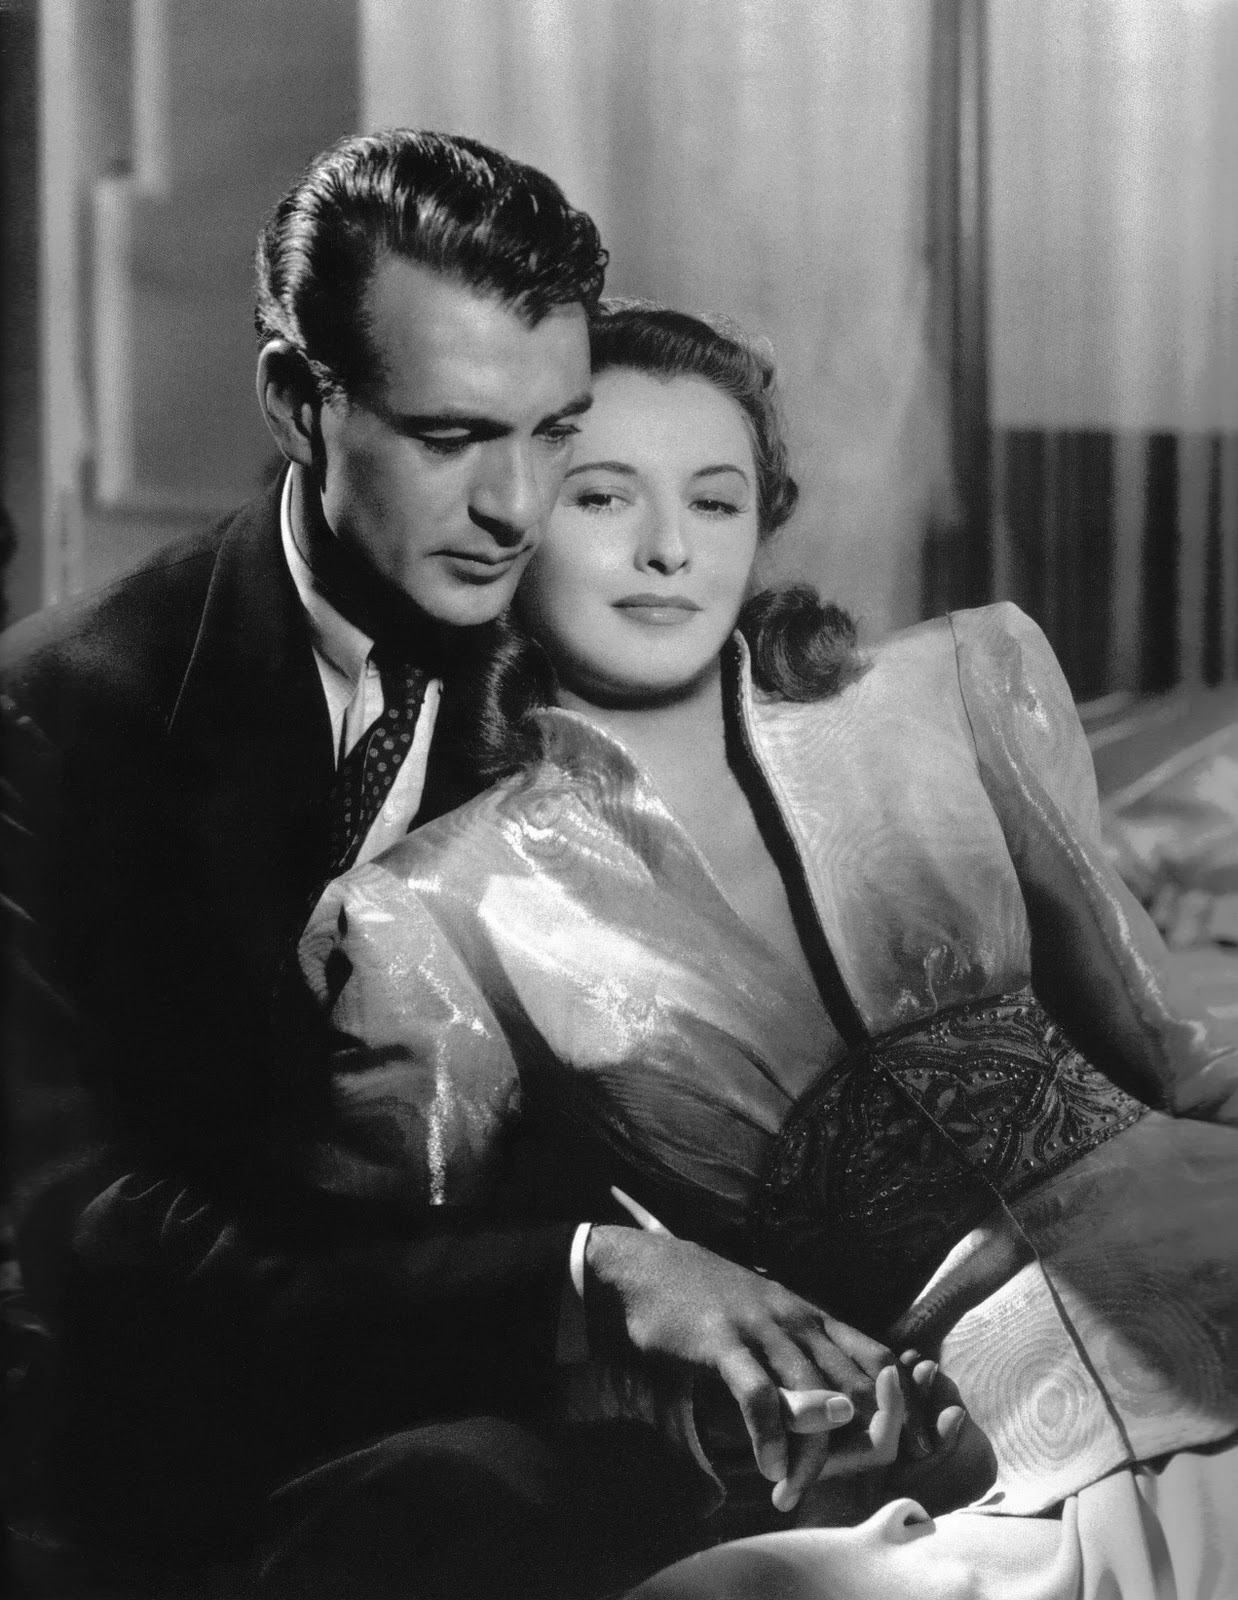 Screwball Cinema: Barbara Stanwyck and Gary Cooper go for laughs in ...